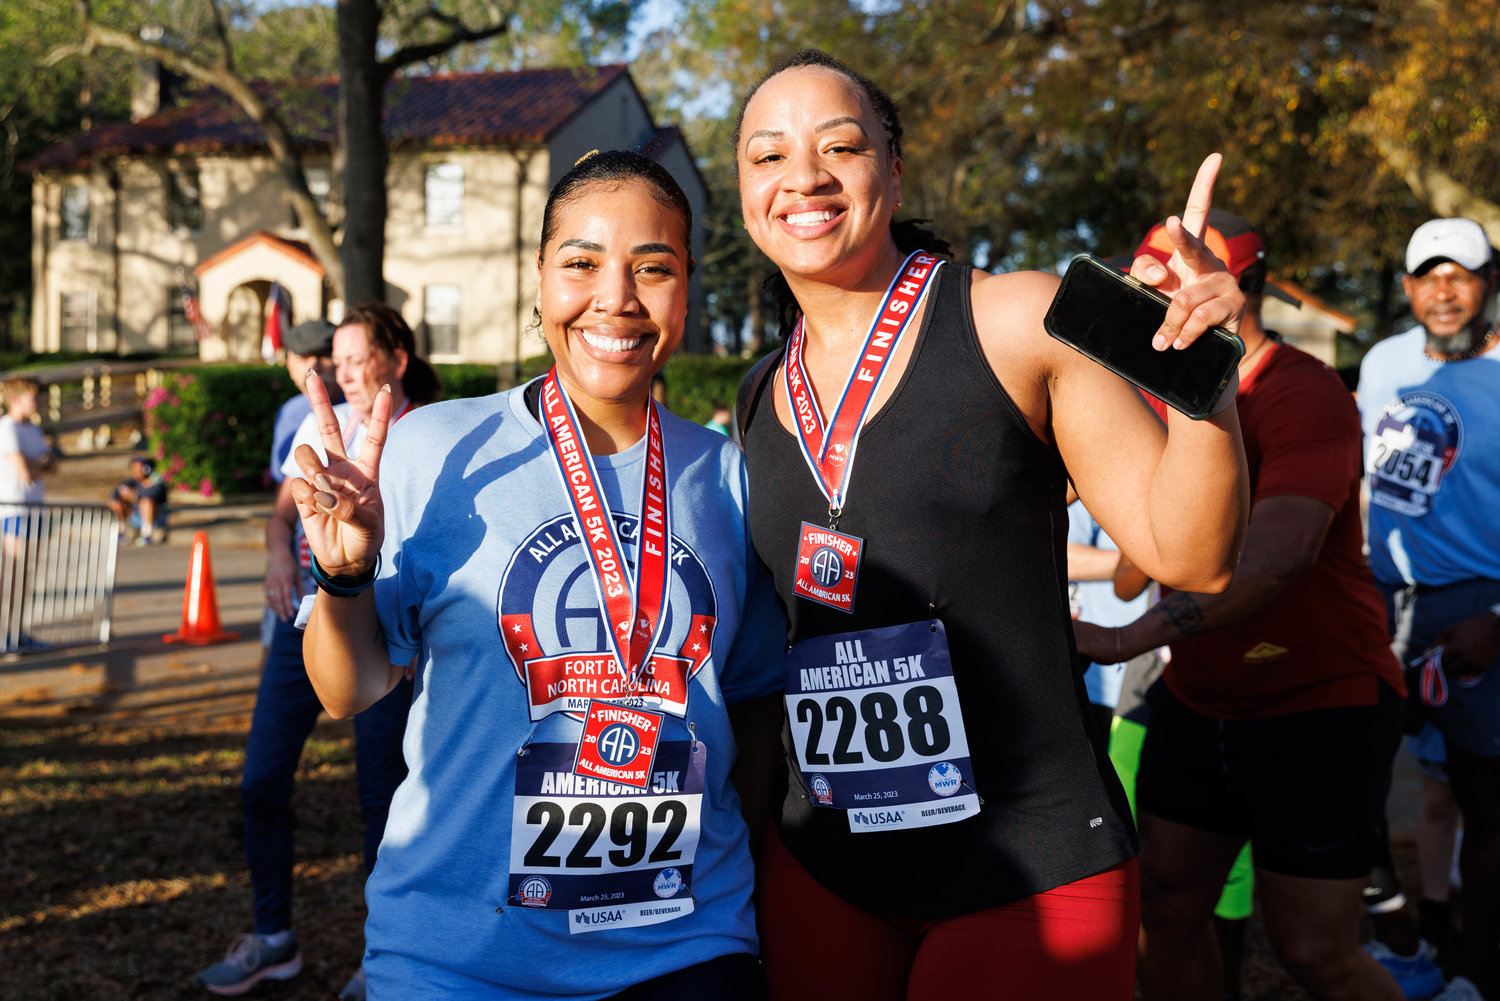 Lista Duwyeniehodges and Laquanda Henderson pose for a portrait after completing the All American Race on Fort Bragg on March 23, 2023.  Tony Wooten/CityView Media